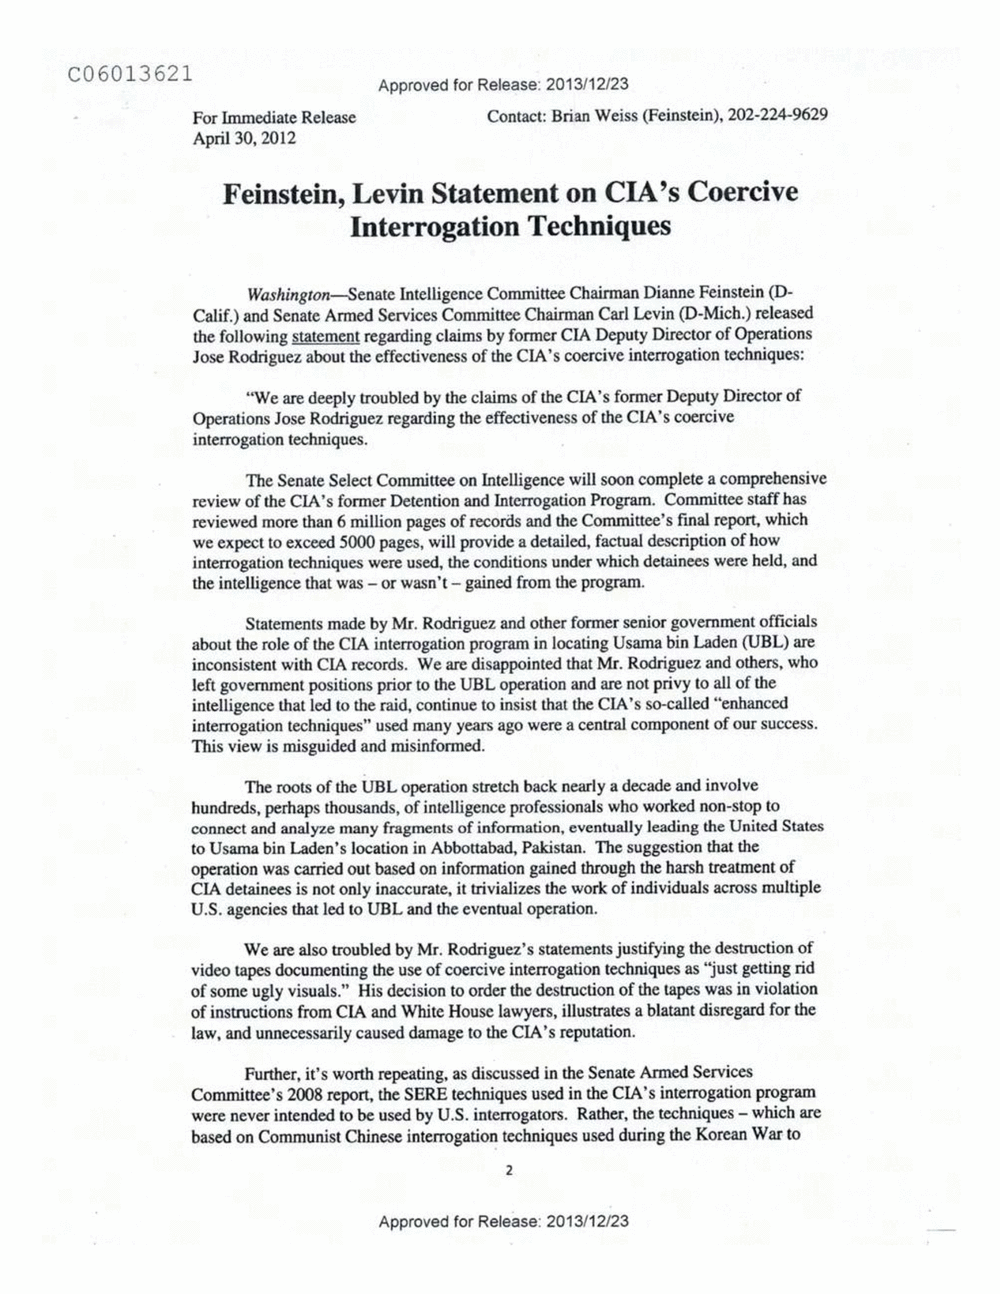 Page 456 from Email Correspondence Between Reporters and CIA Flacks